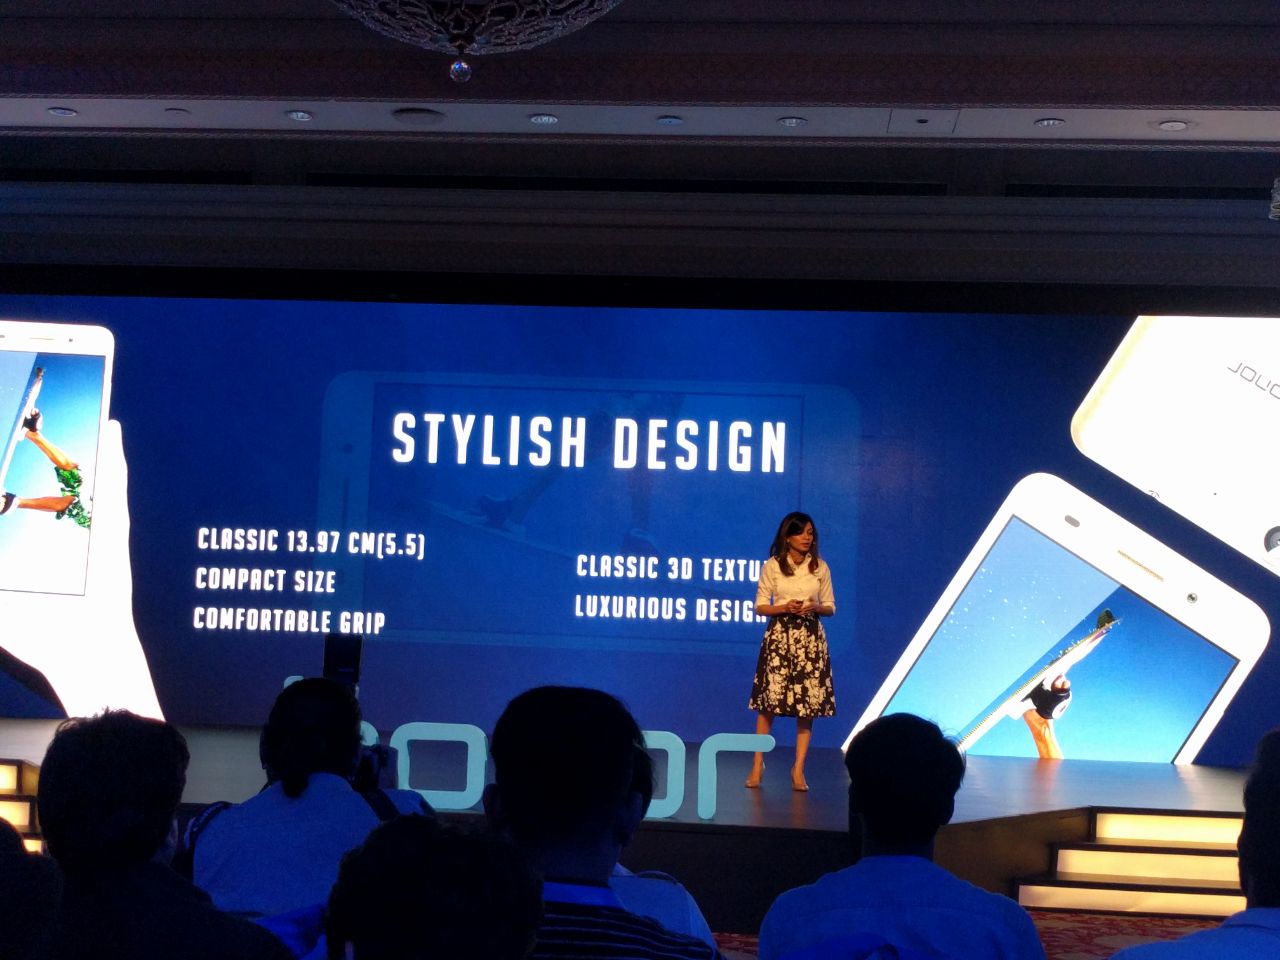 Honor Holly 3: Company's First 'Made in India' Smartphone Launched For Rs 9,999